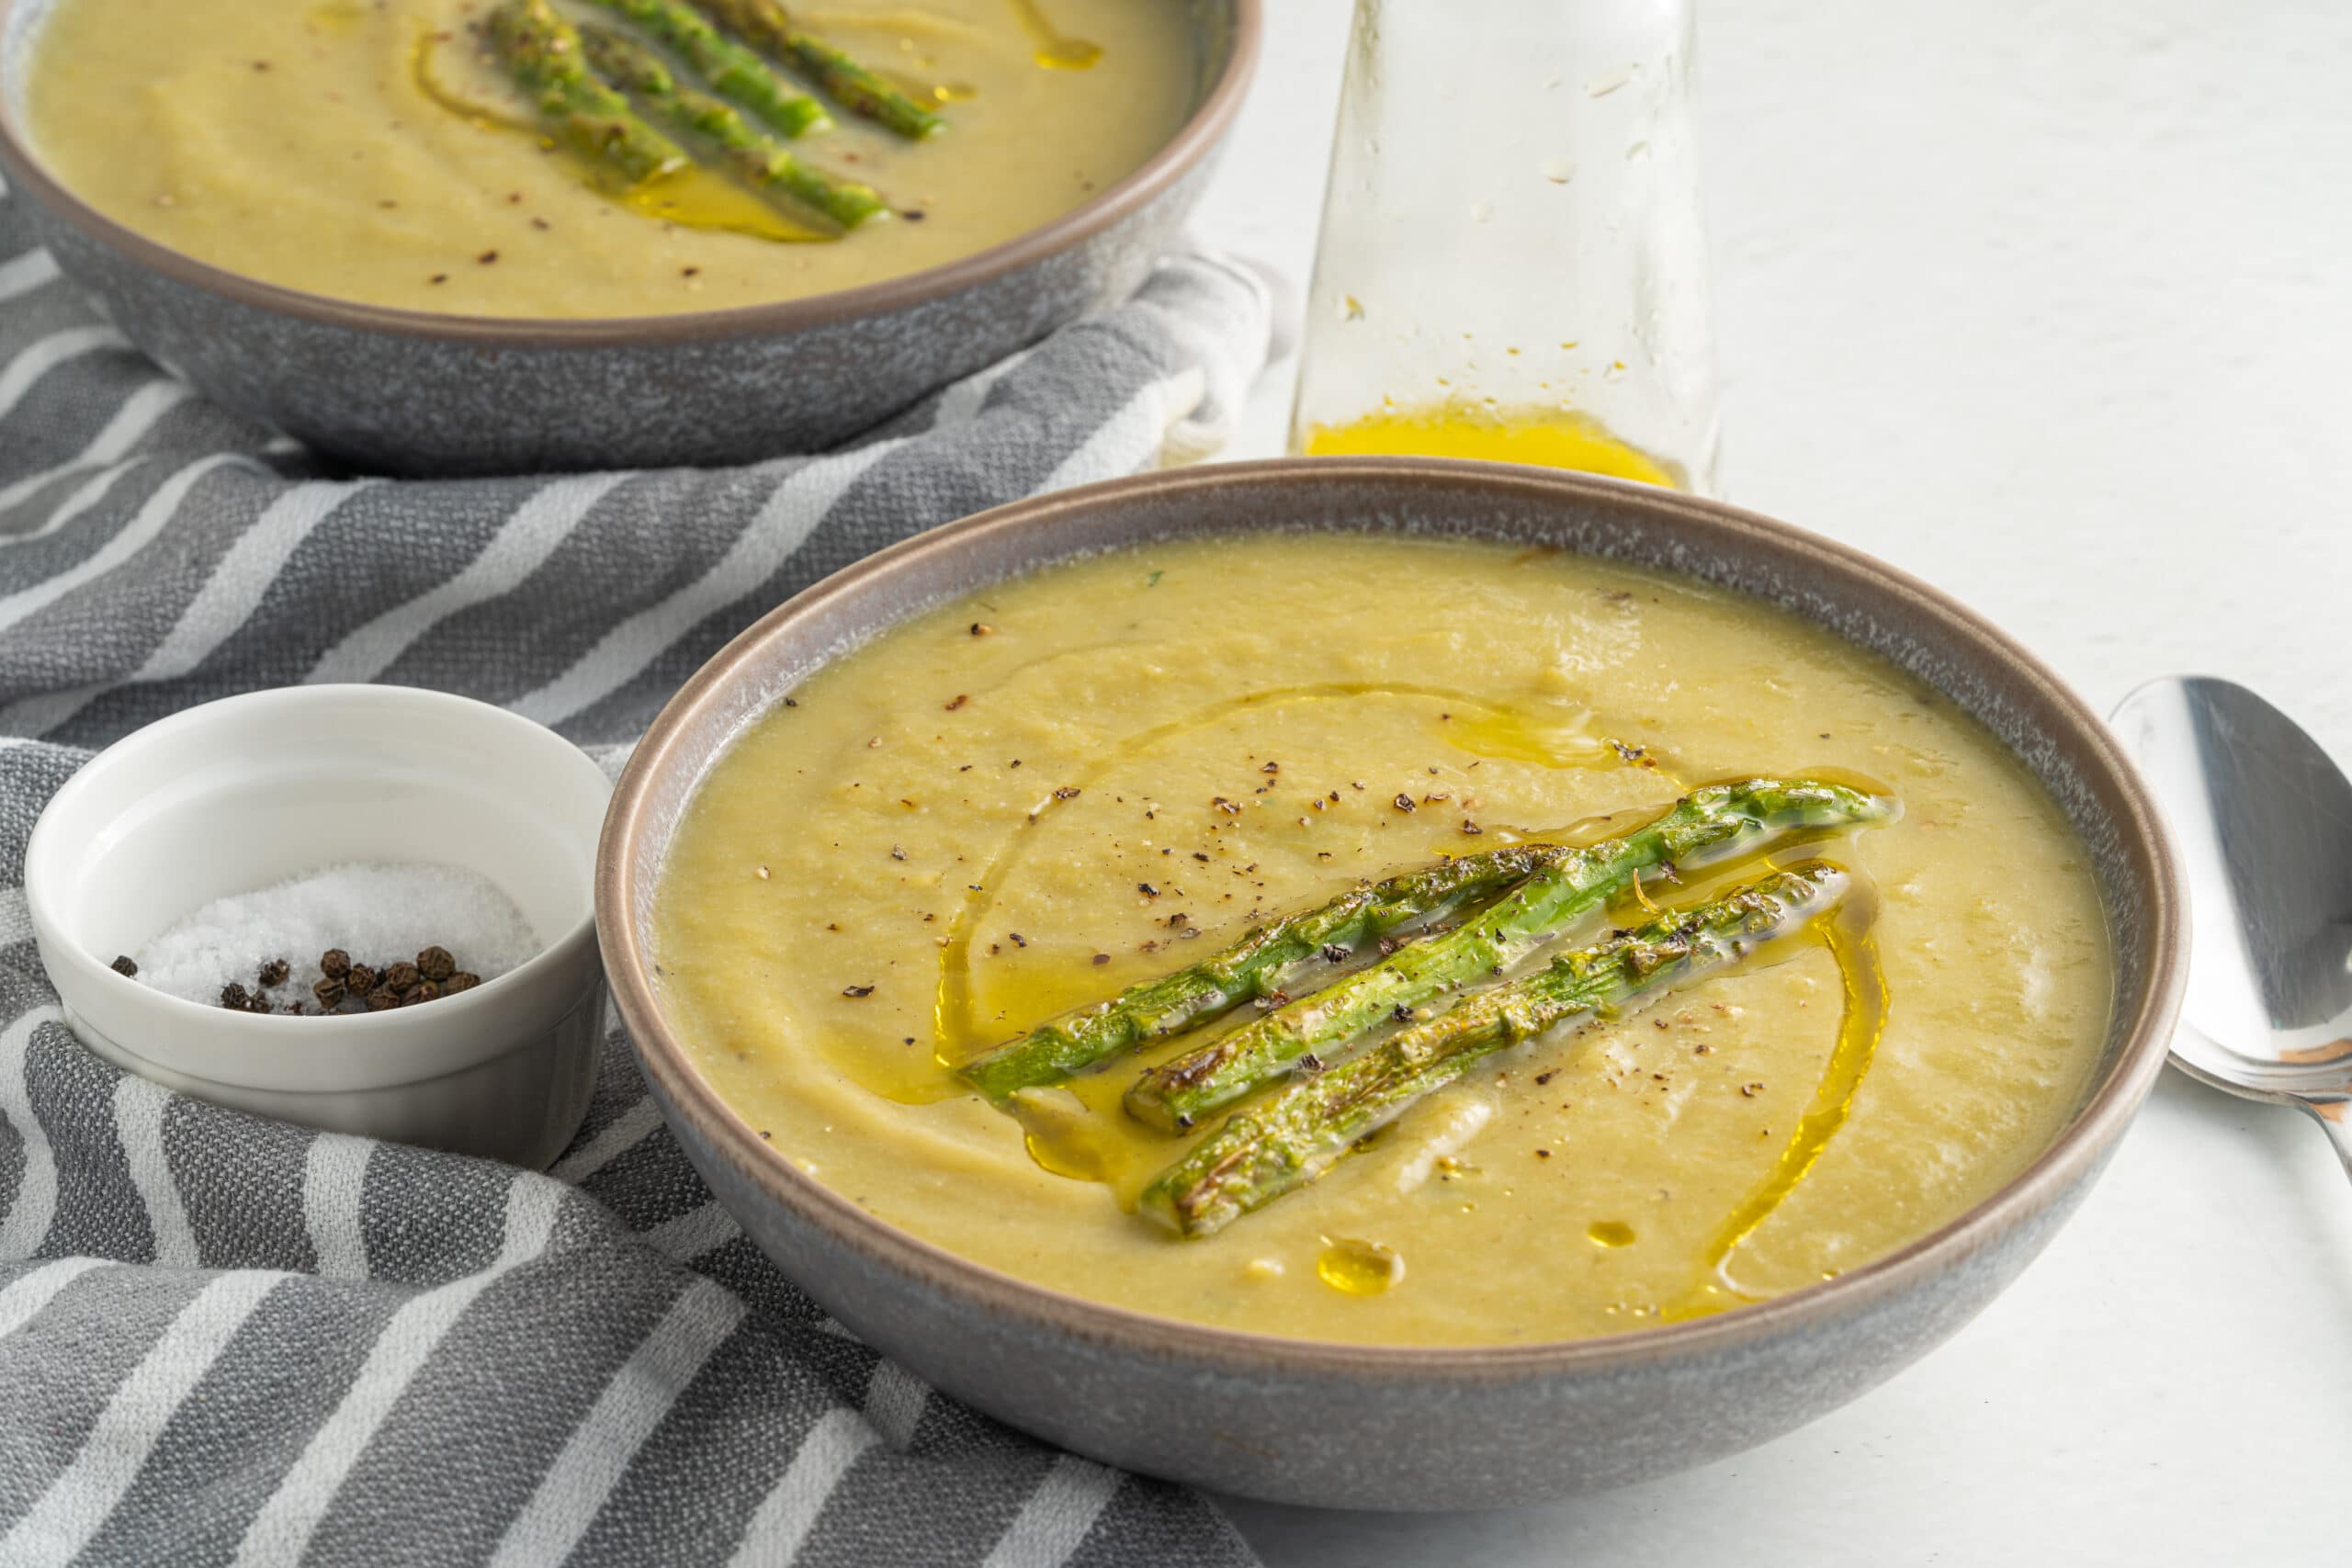 Creamy asparagus soup in a grey bowl with three asparagus spears in the middle and a small white bowl with salt and pepper in it.